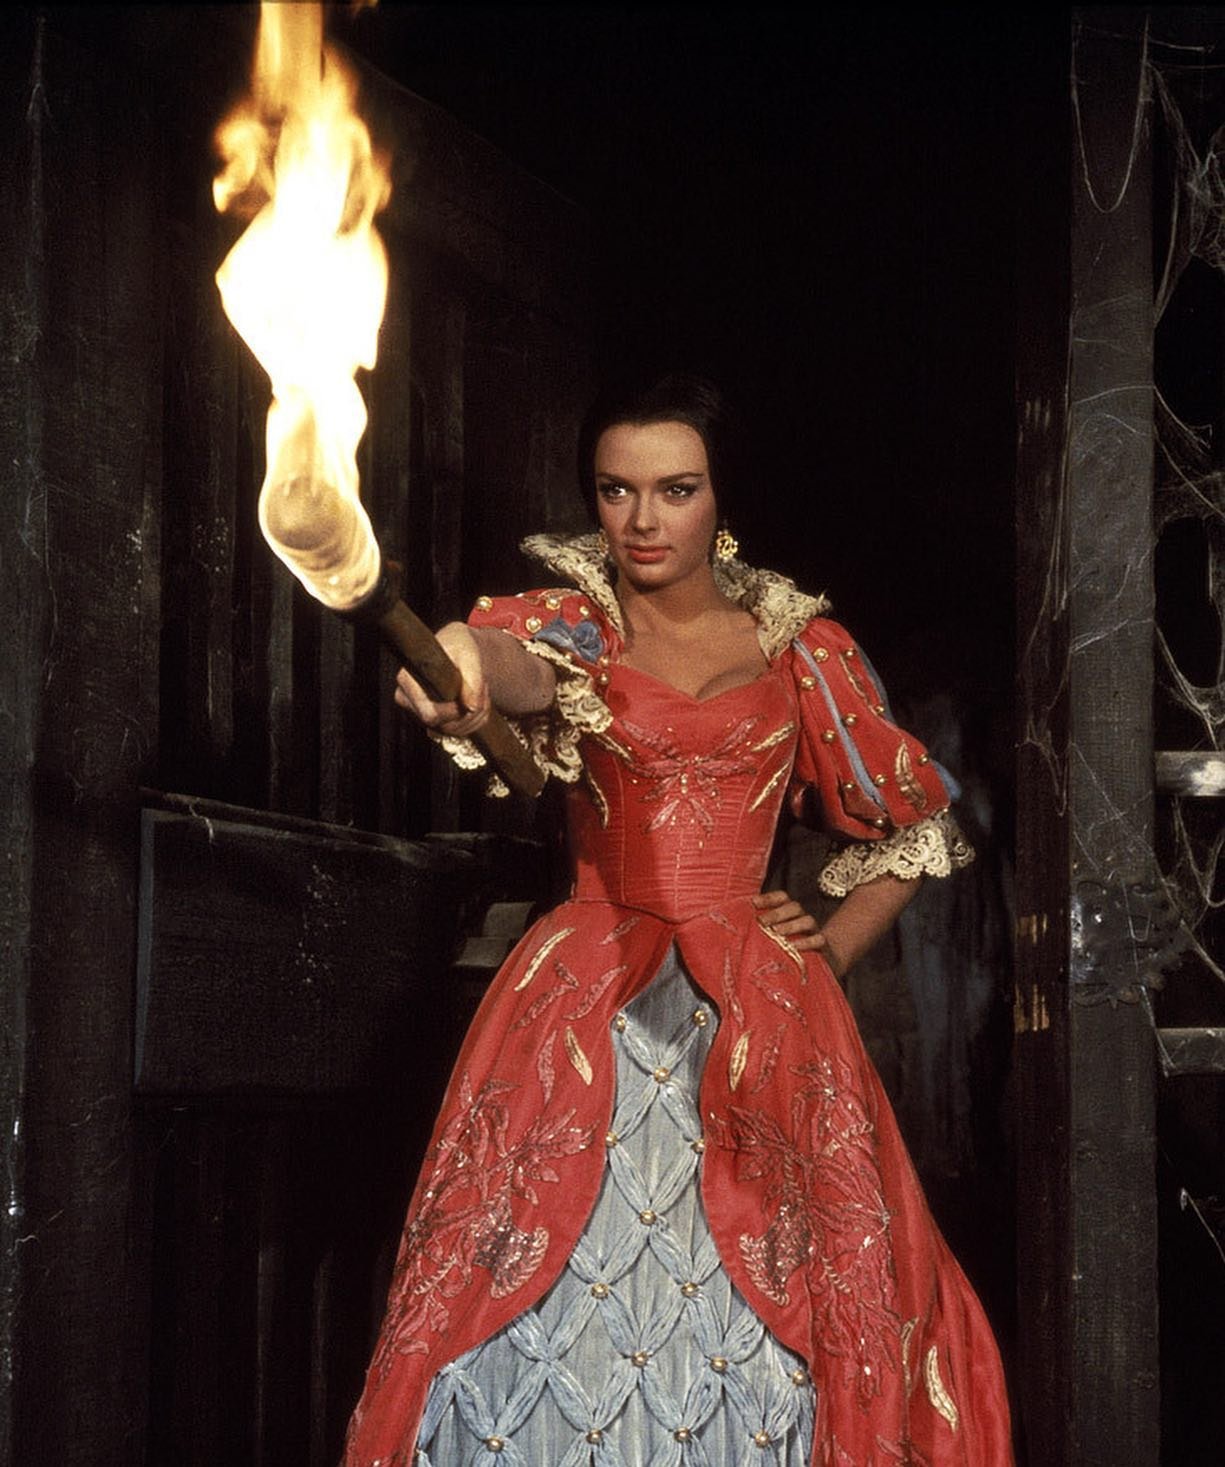 🕰️SHOP IS CLOSED MONDAYS🕰️
The Pit and the Pendulum, 1961, costume design by Marjorie Corso. Directed by Roger Corman with Barbara Steele &amp; Vincent Price 🔥🕯️🔥 nailing aesthetics long before Pinterest boards &amp; Tumblr😉
#costumedesign #vin